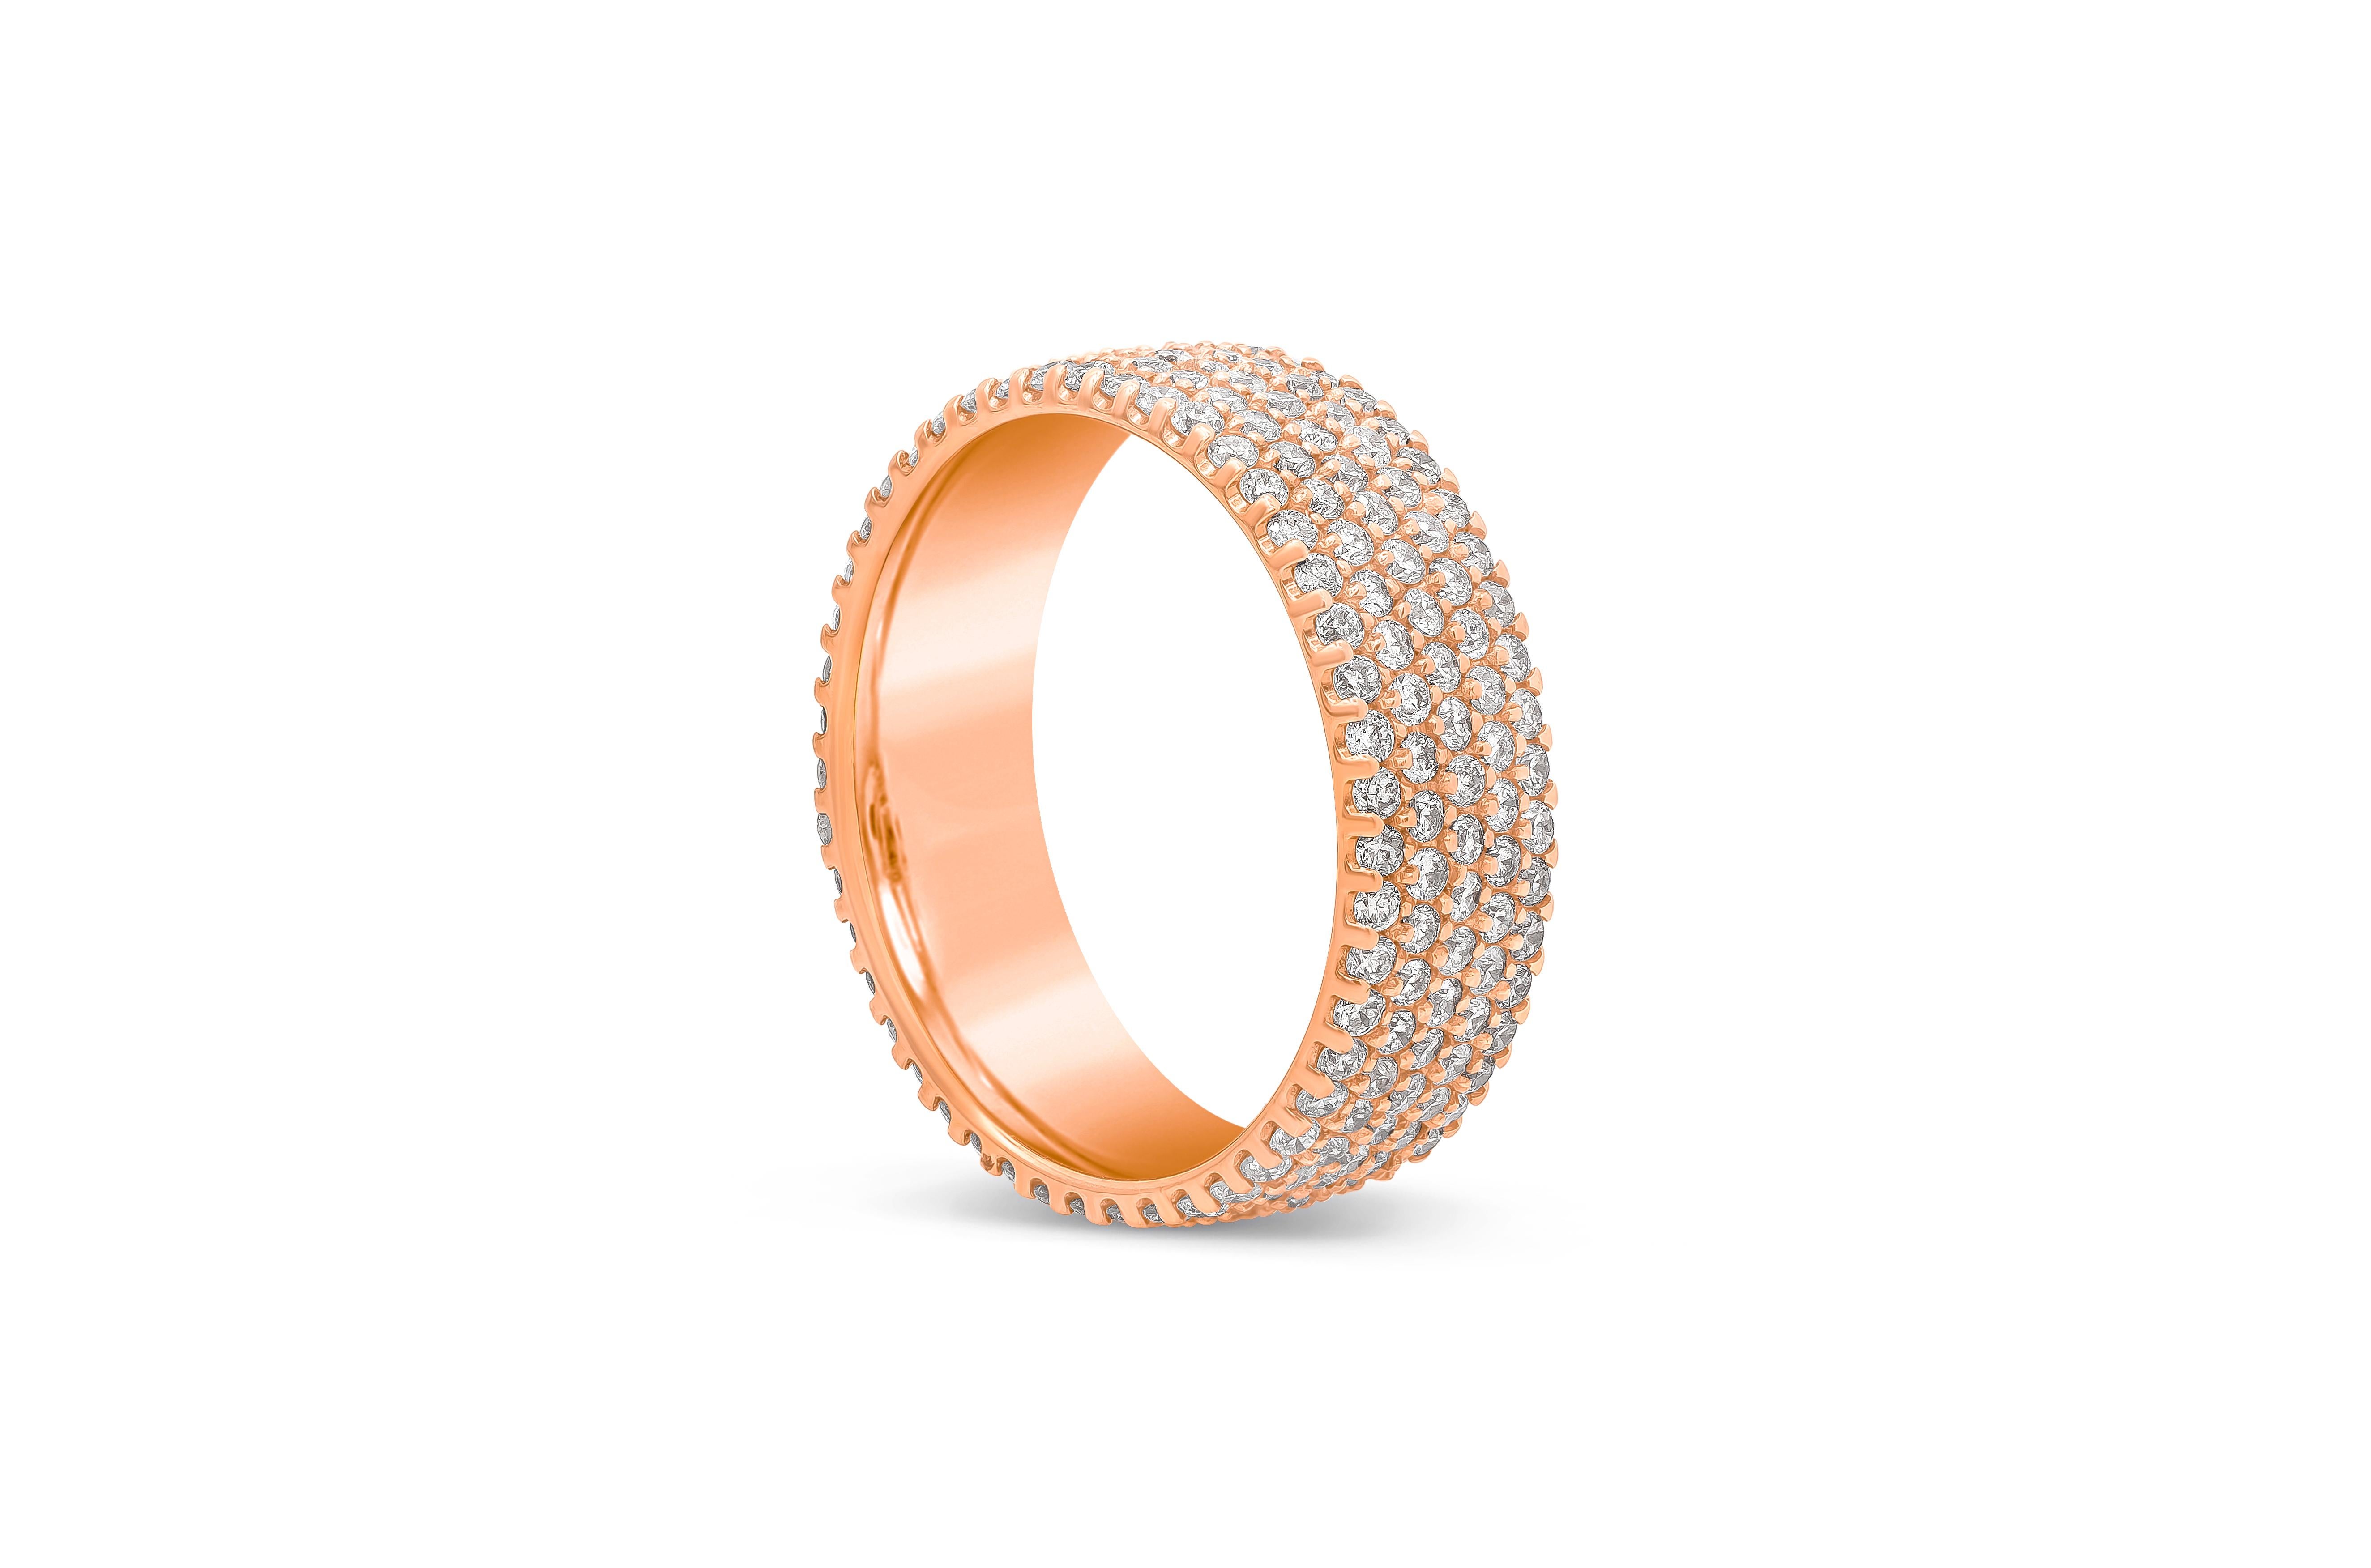 A versatile piece of jewelry that can be used as a fashion ring as well. Features 5 rows of round brilliant diamonds weighing 1.75 carats total, micro-pave set. Made with 18K Rose Gold. Size 6.5 US resizable upon request and 6.11mm in width.

Style